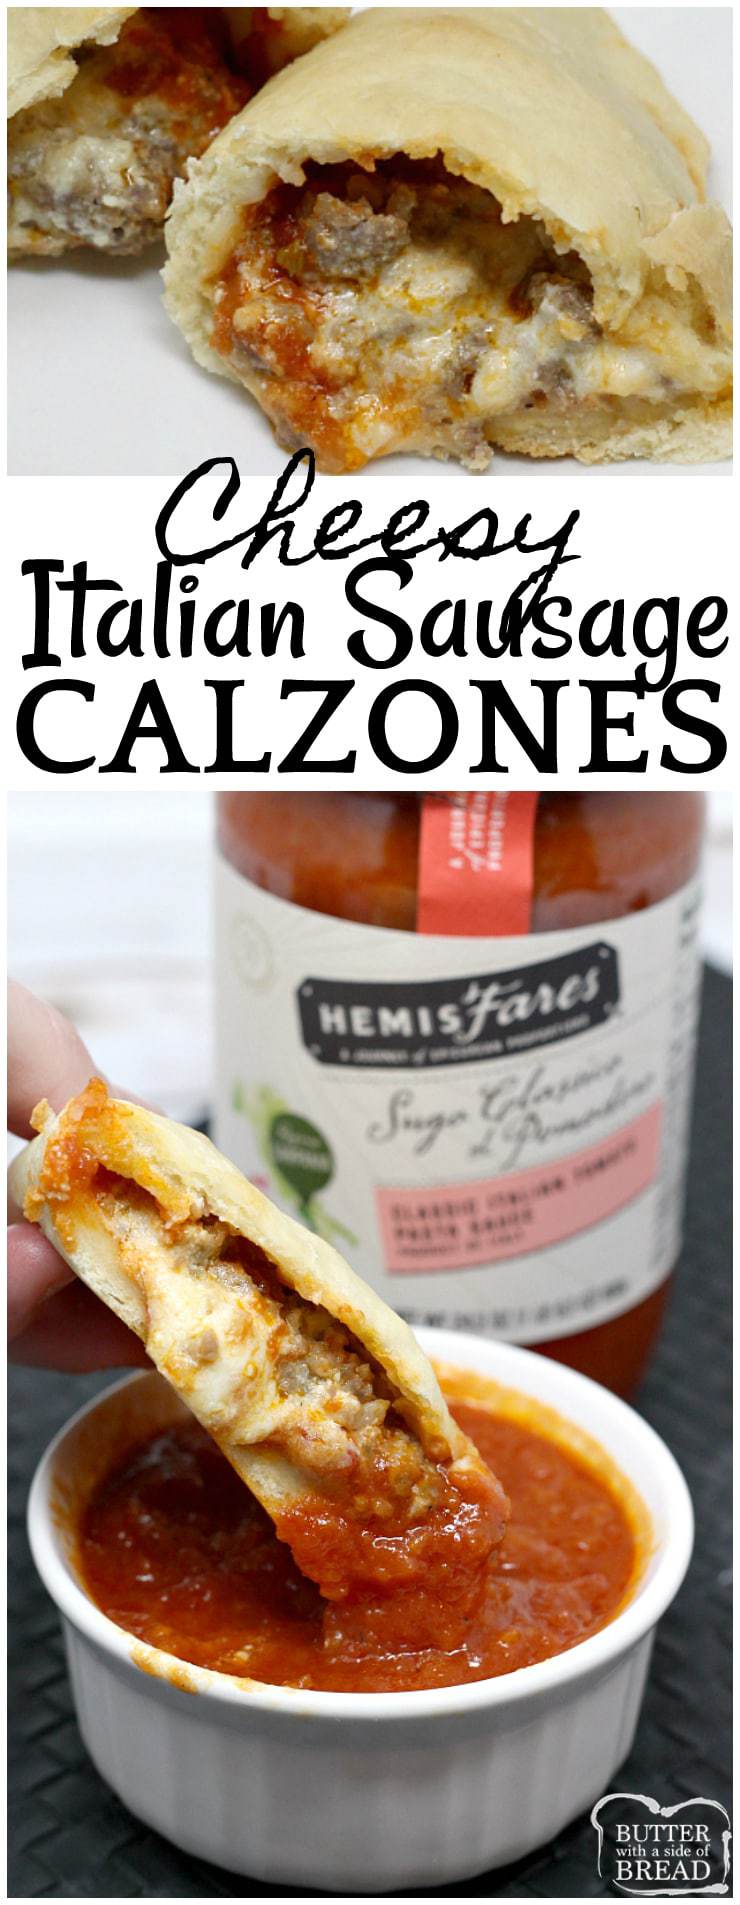 Cheesy Italian Sausage Calzones are a family favorite – homemade pizza crust filled with parmesan, mozzarella, ricotta, marinara sauce and juicy sausage!